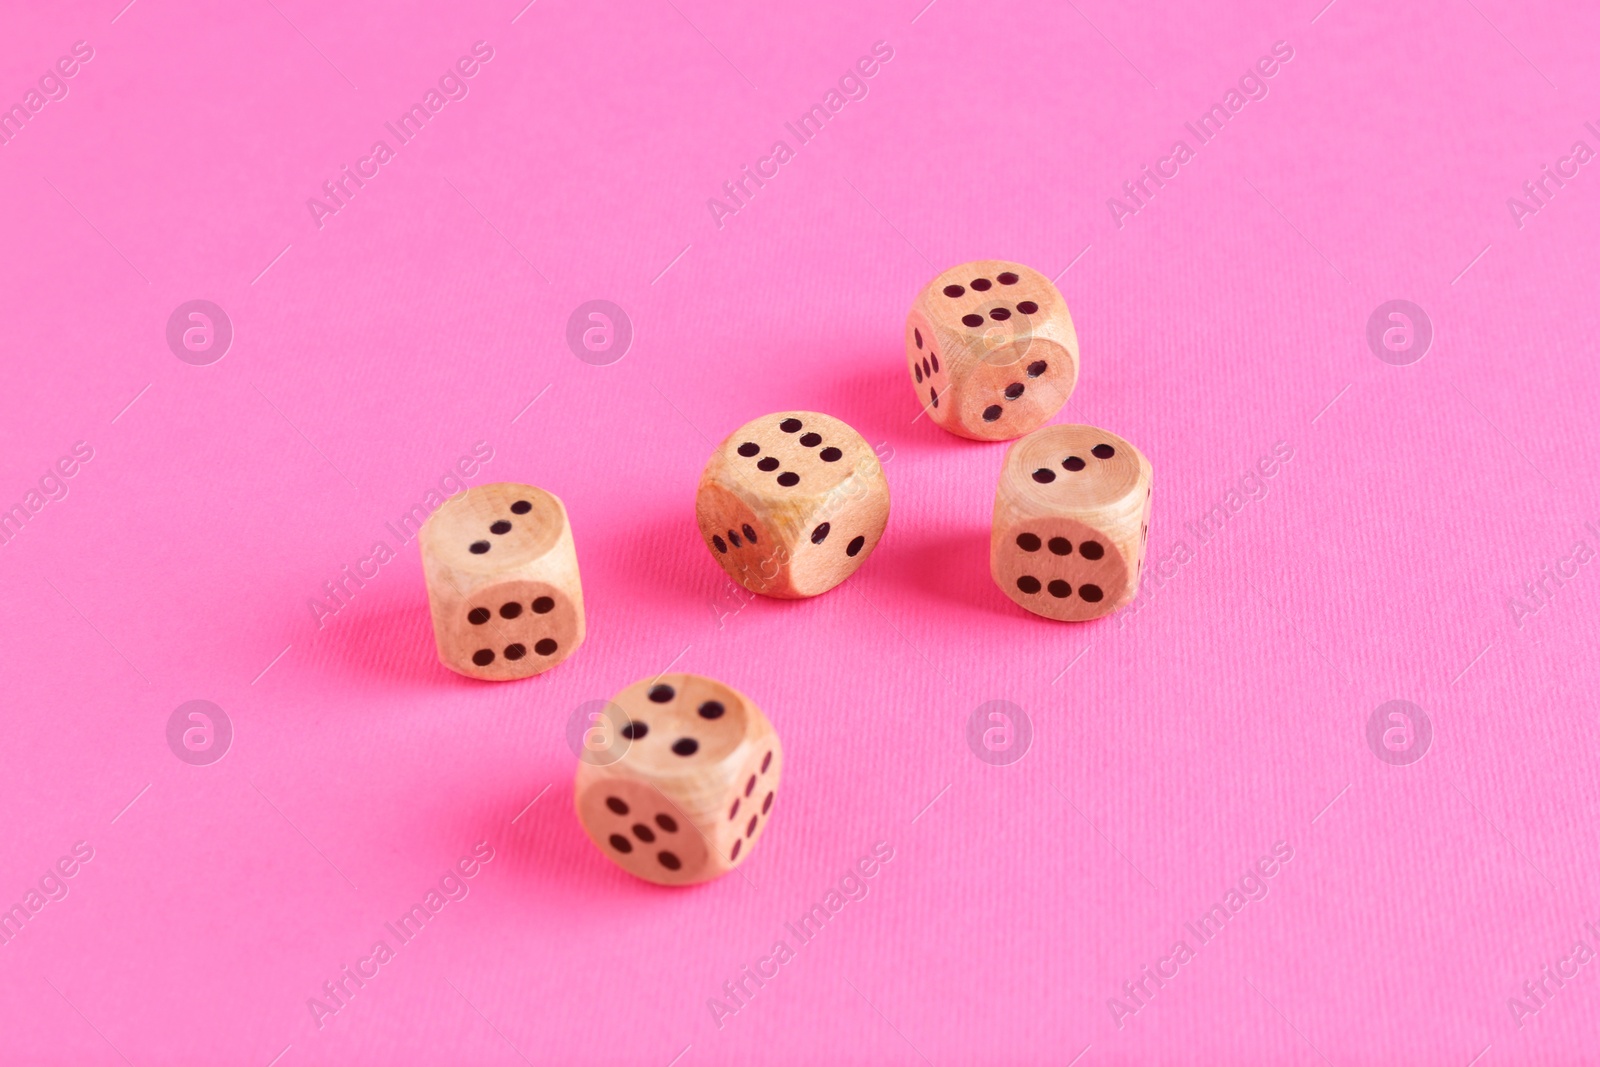 Photo of Many wooden game dices on pink background